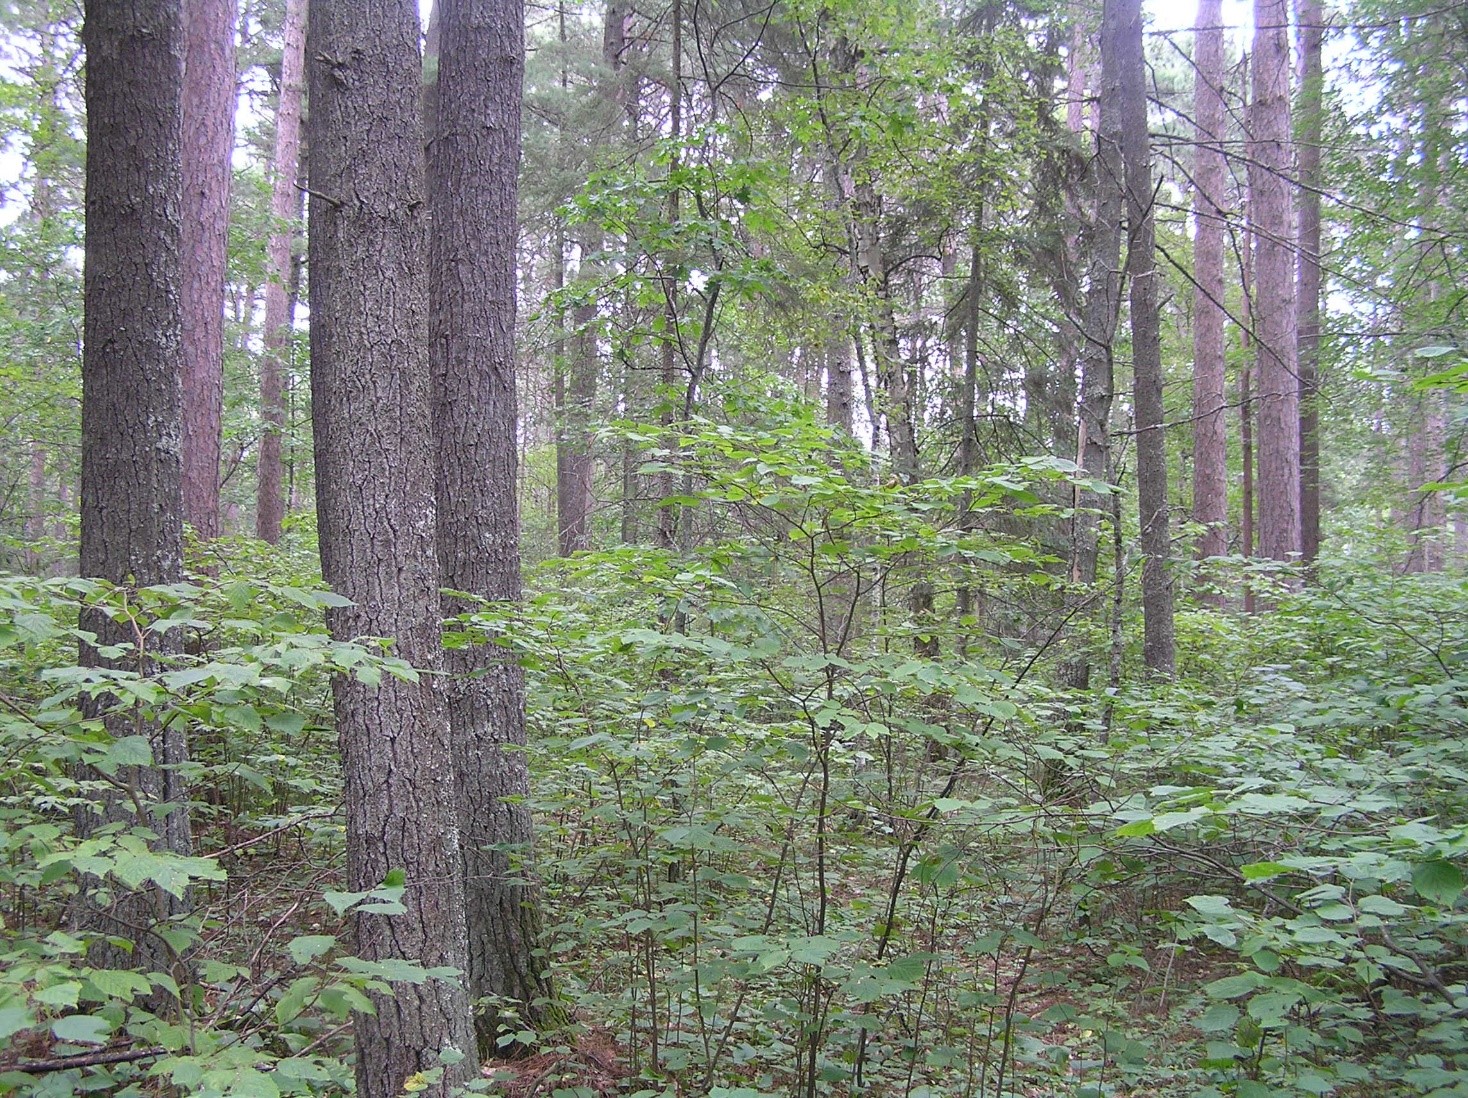 Understory condition in 2016 in a similar, adjacent stand with 3 burns but no harvest